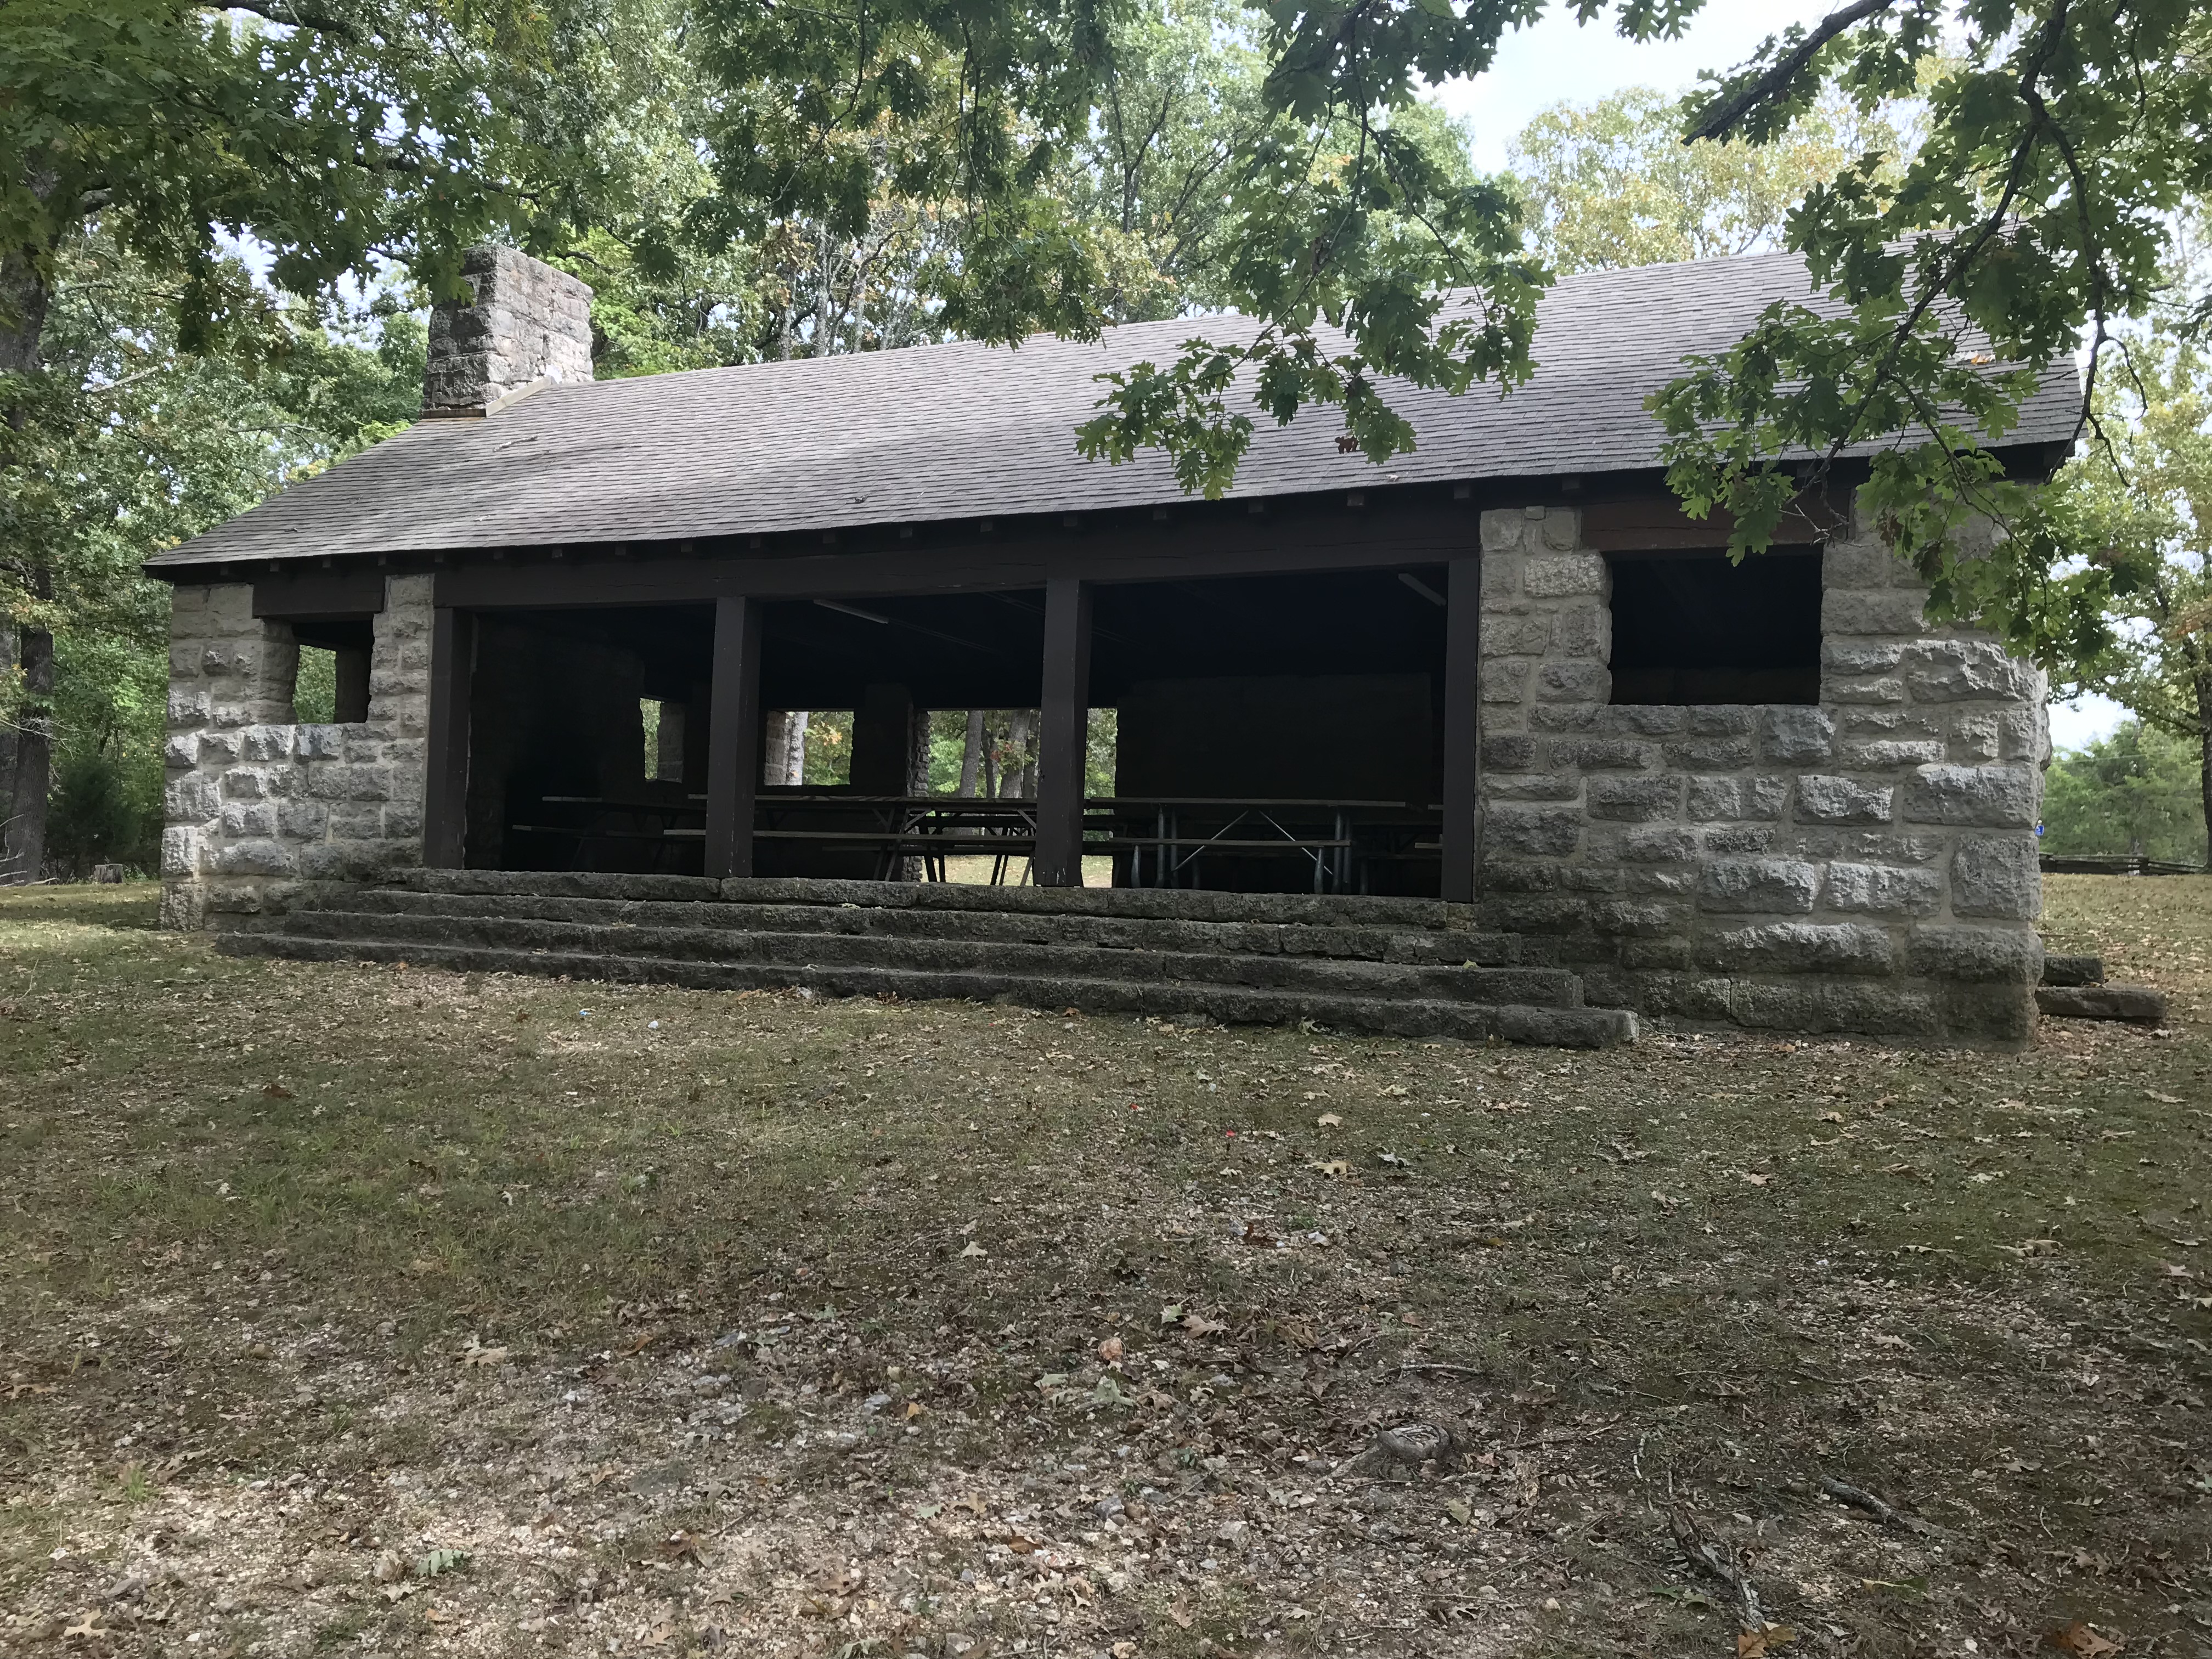 Exterior of rock picnic shelter